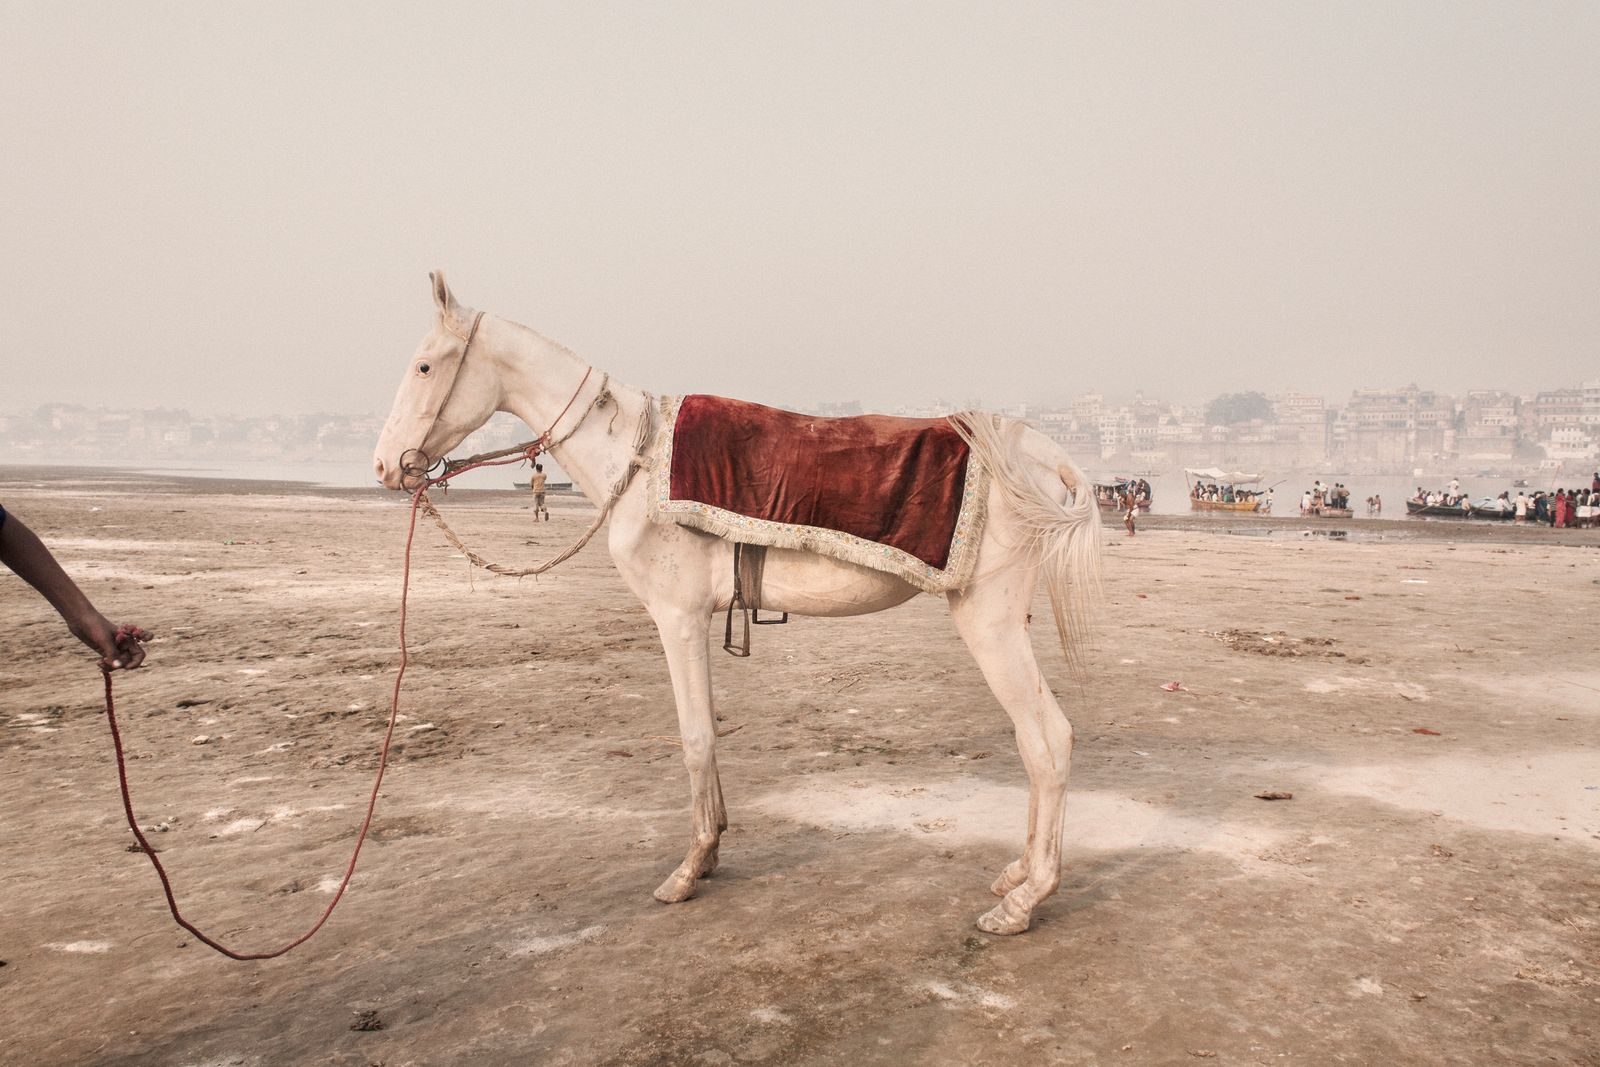 © Giulio Di Sturco - Horse used to transport the devotees along the banks of the Ganges River,